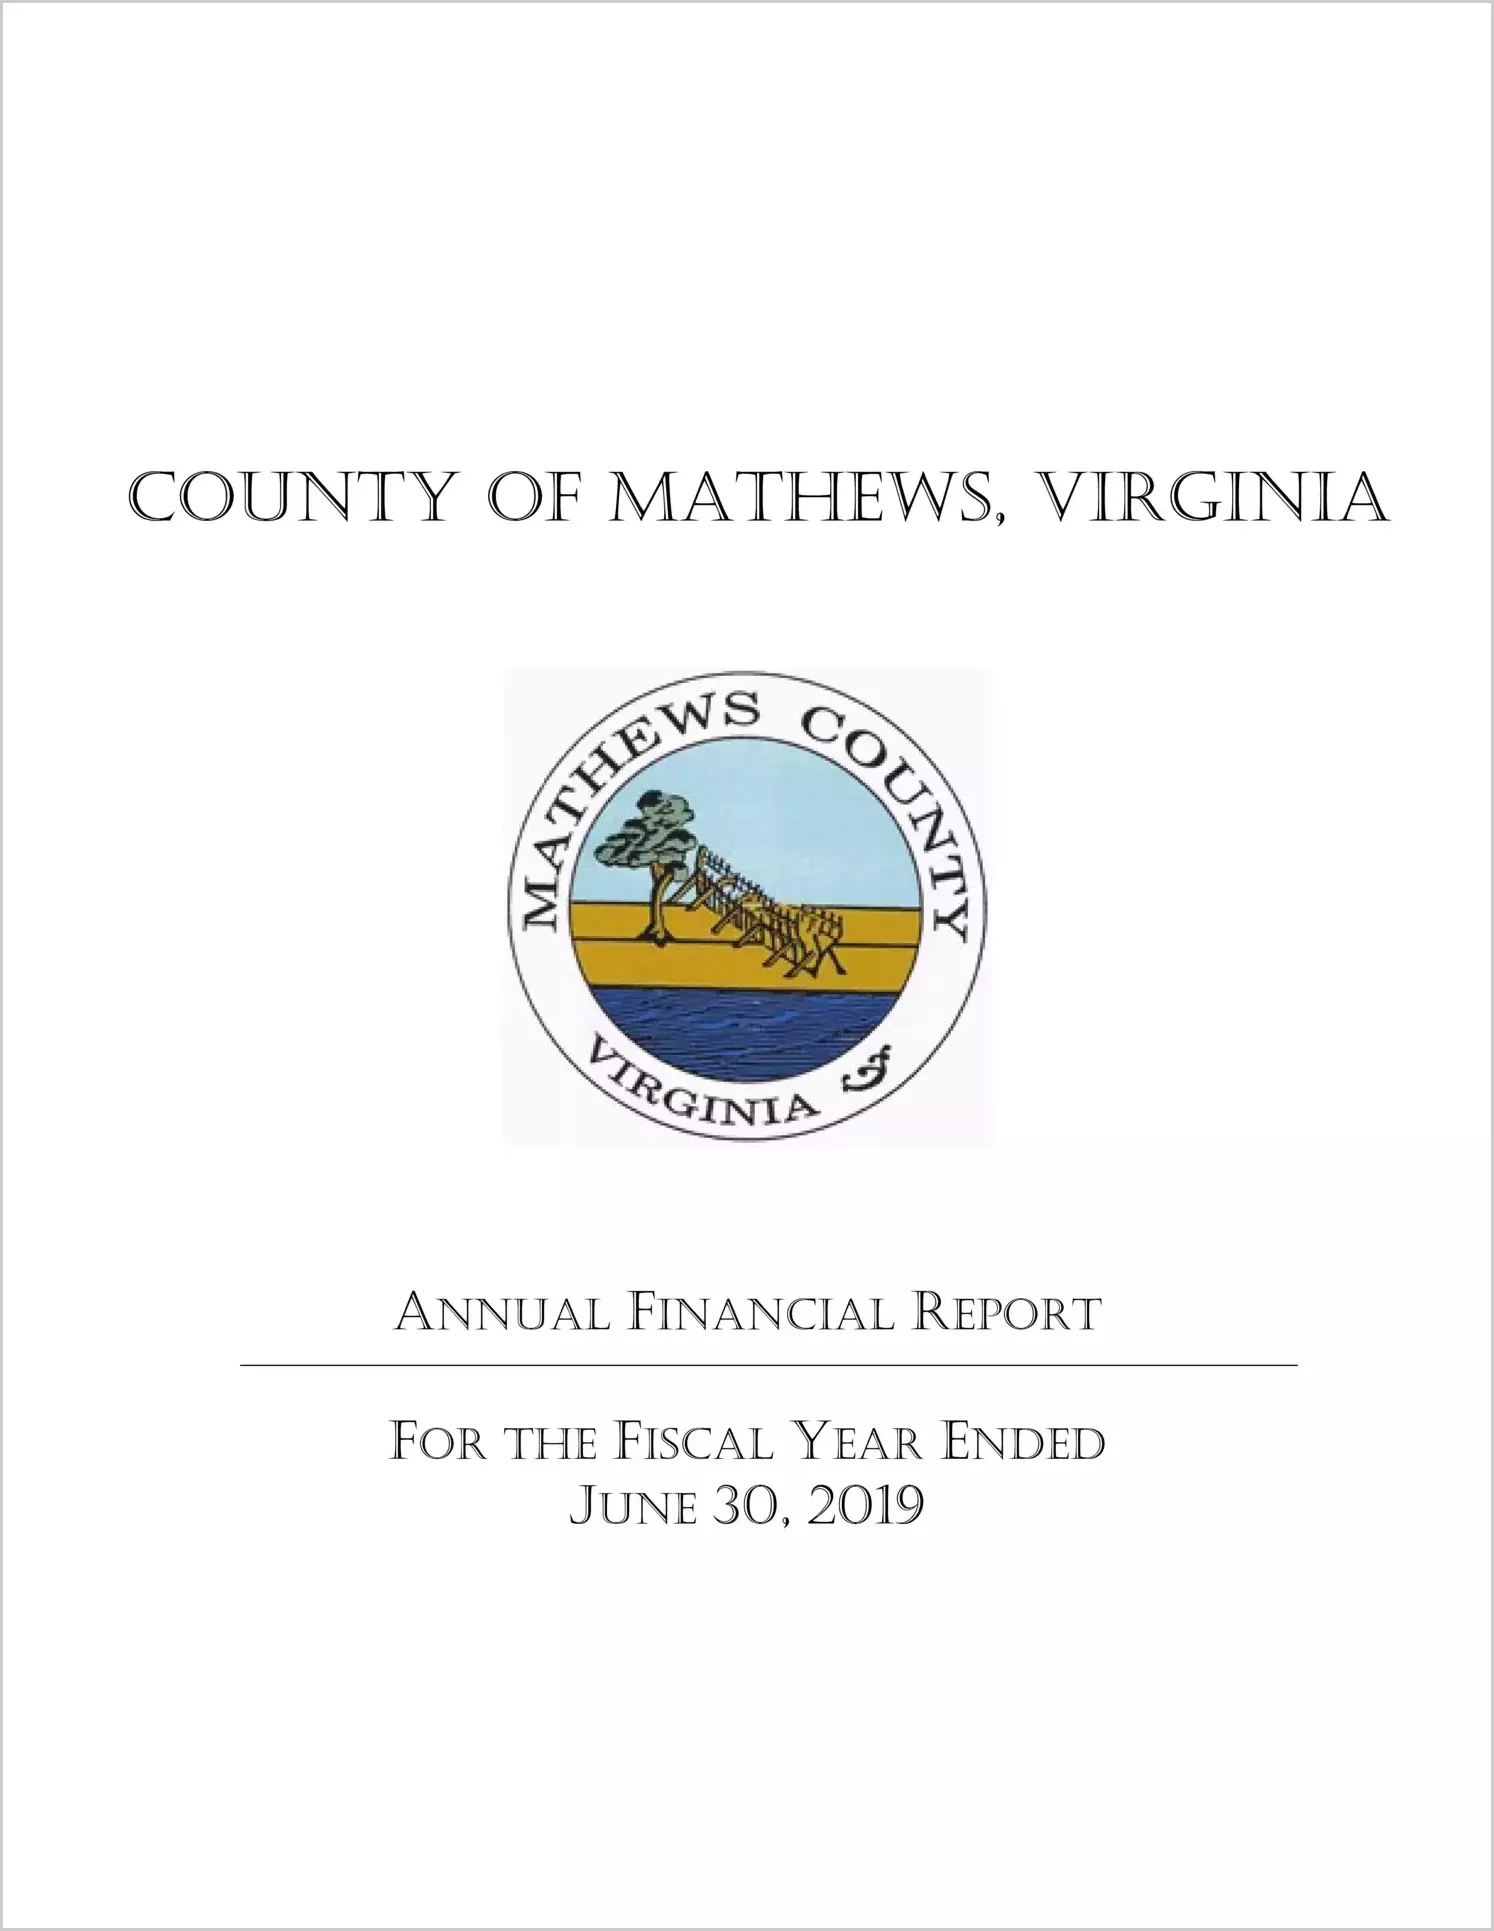 2019 Annual Financial Report for County of Mathews